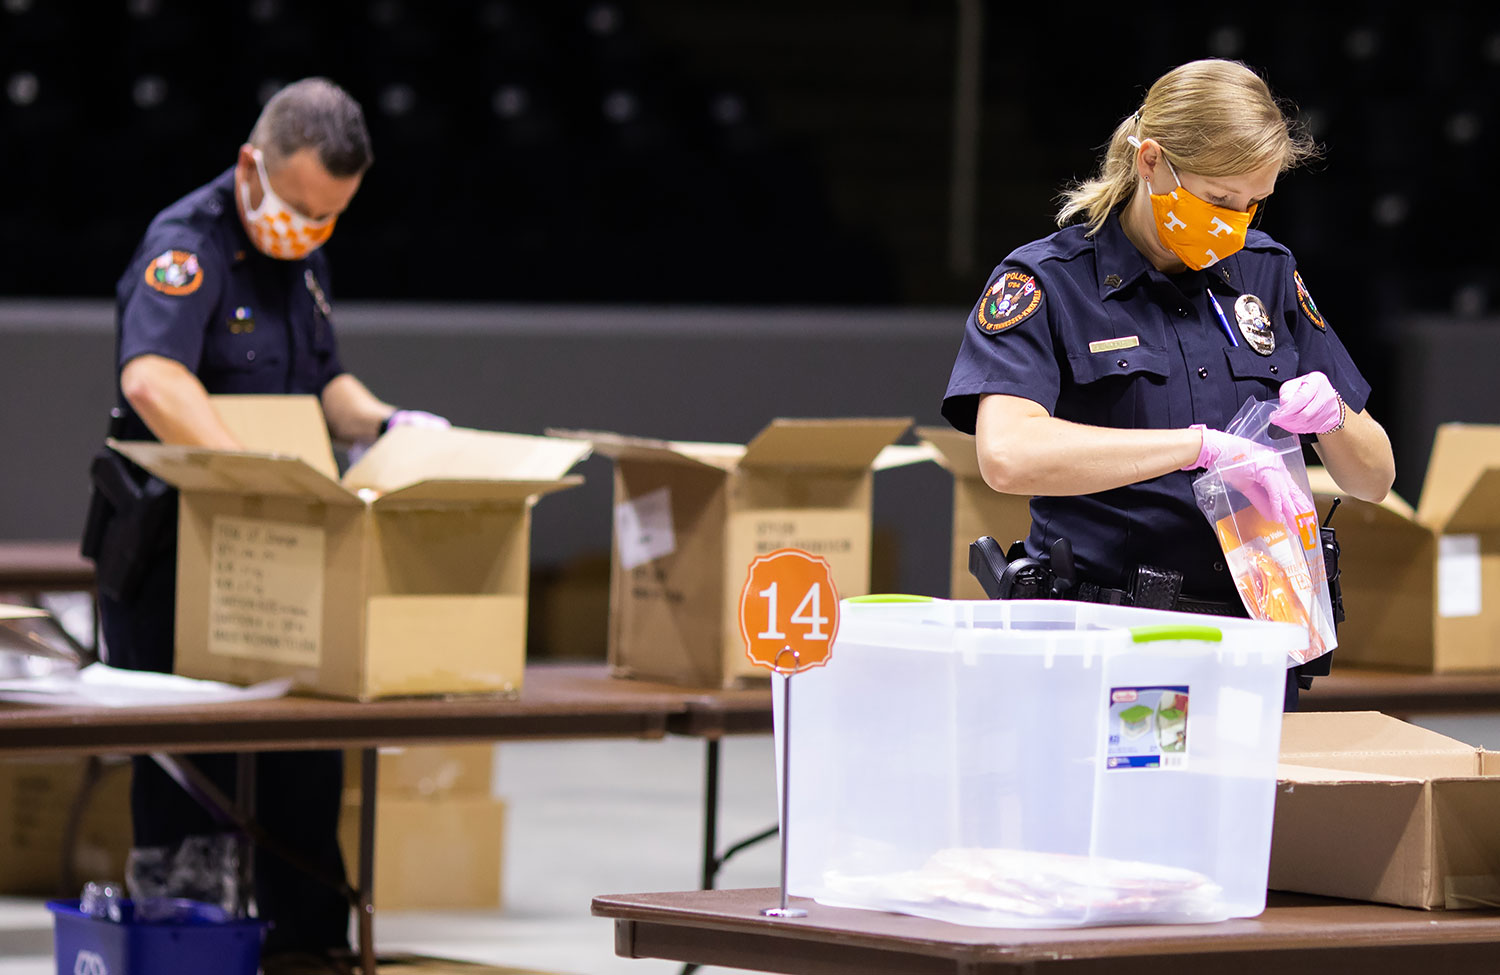 Two uniformed UTPD officers are stuffing health kits during COVID